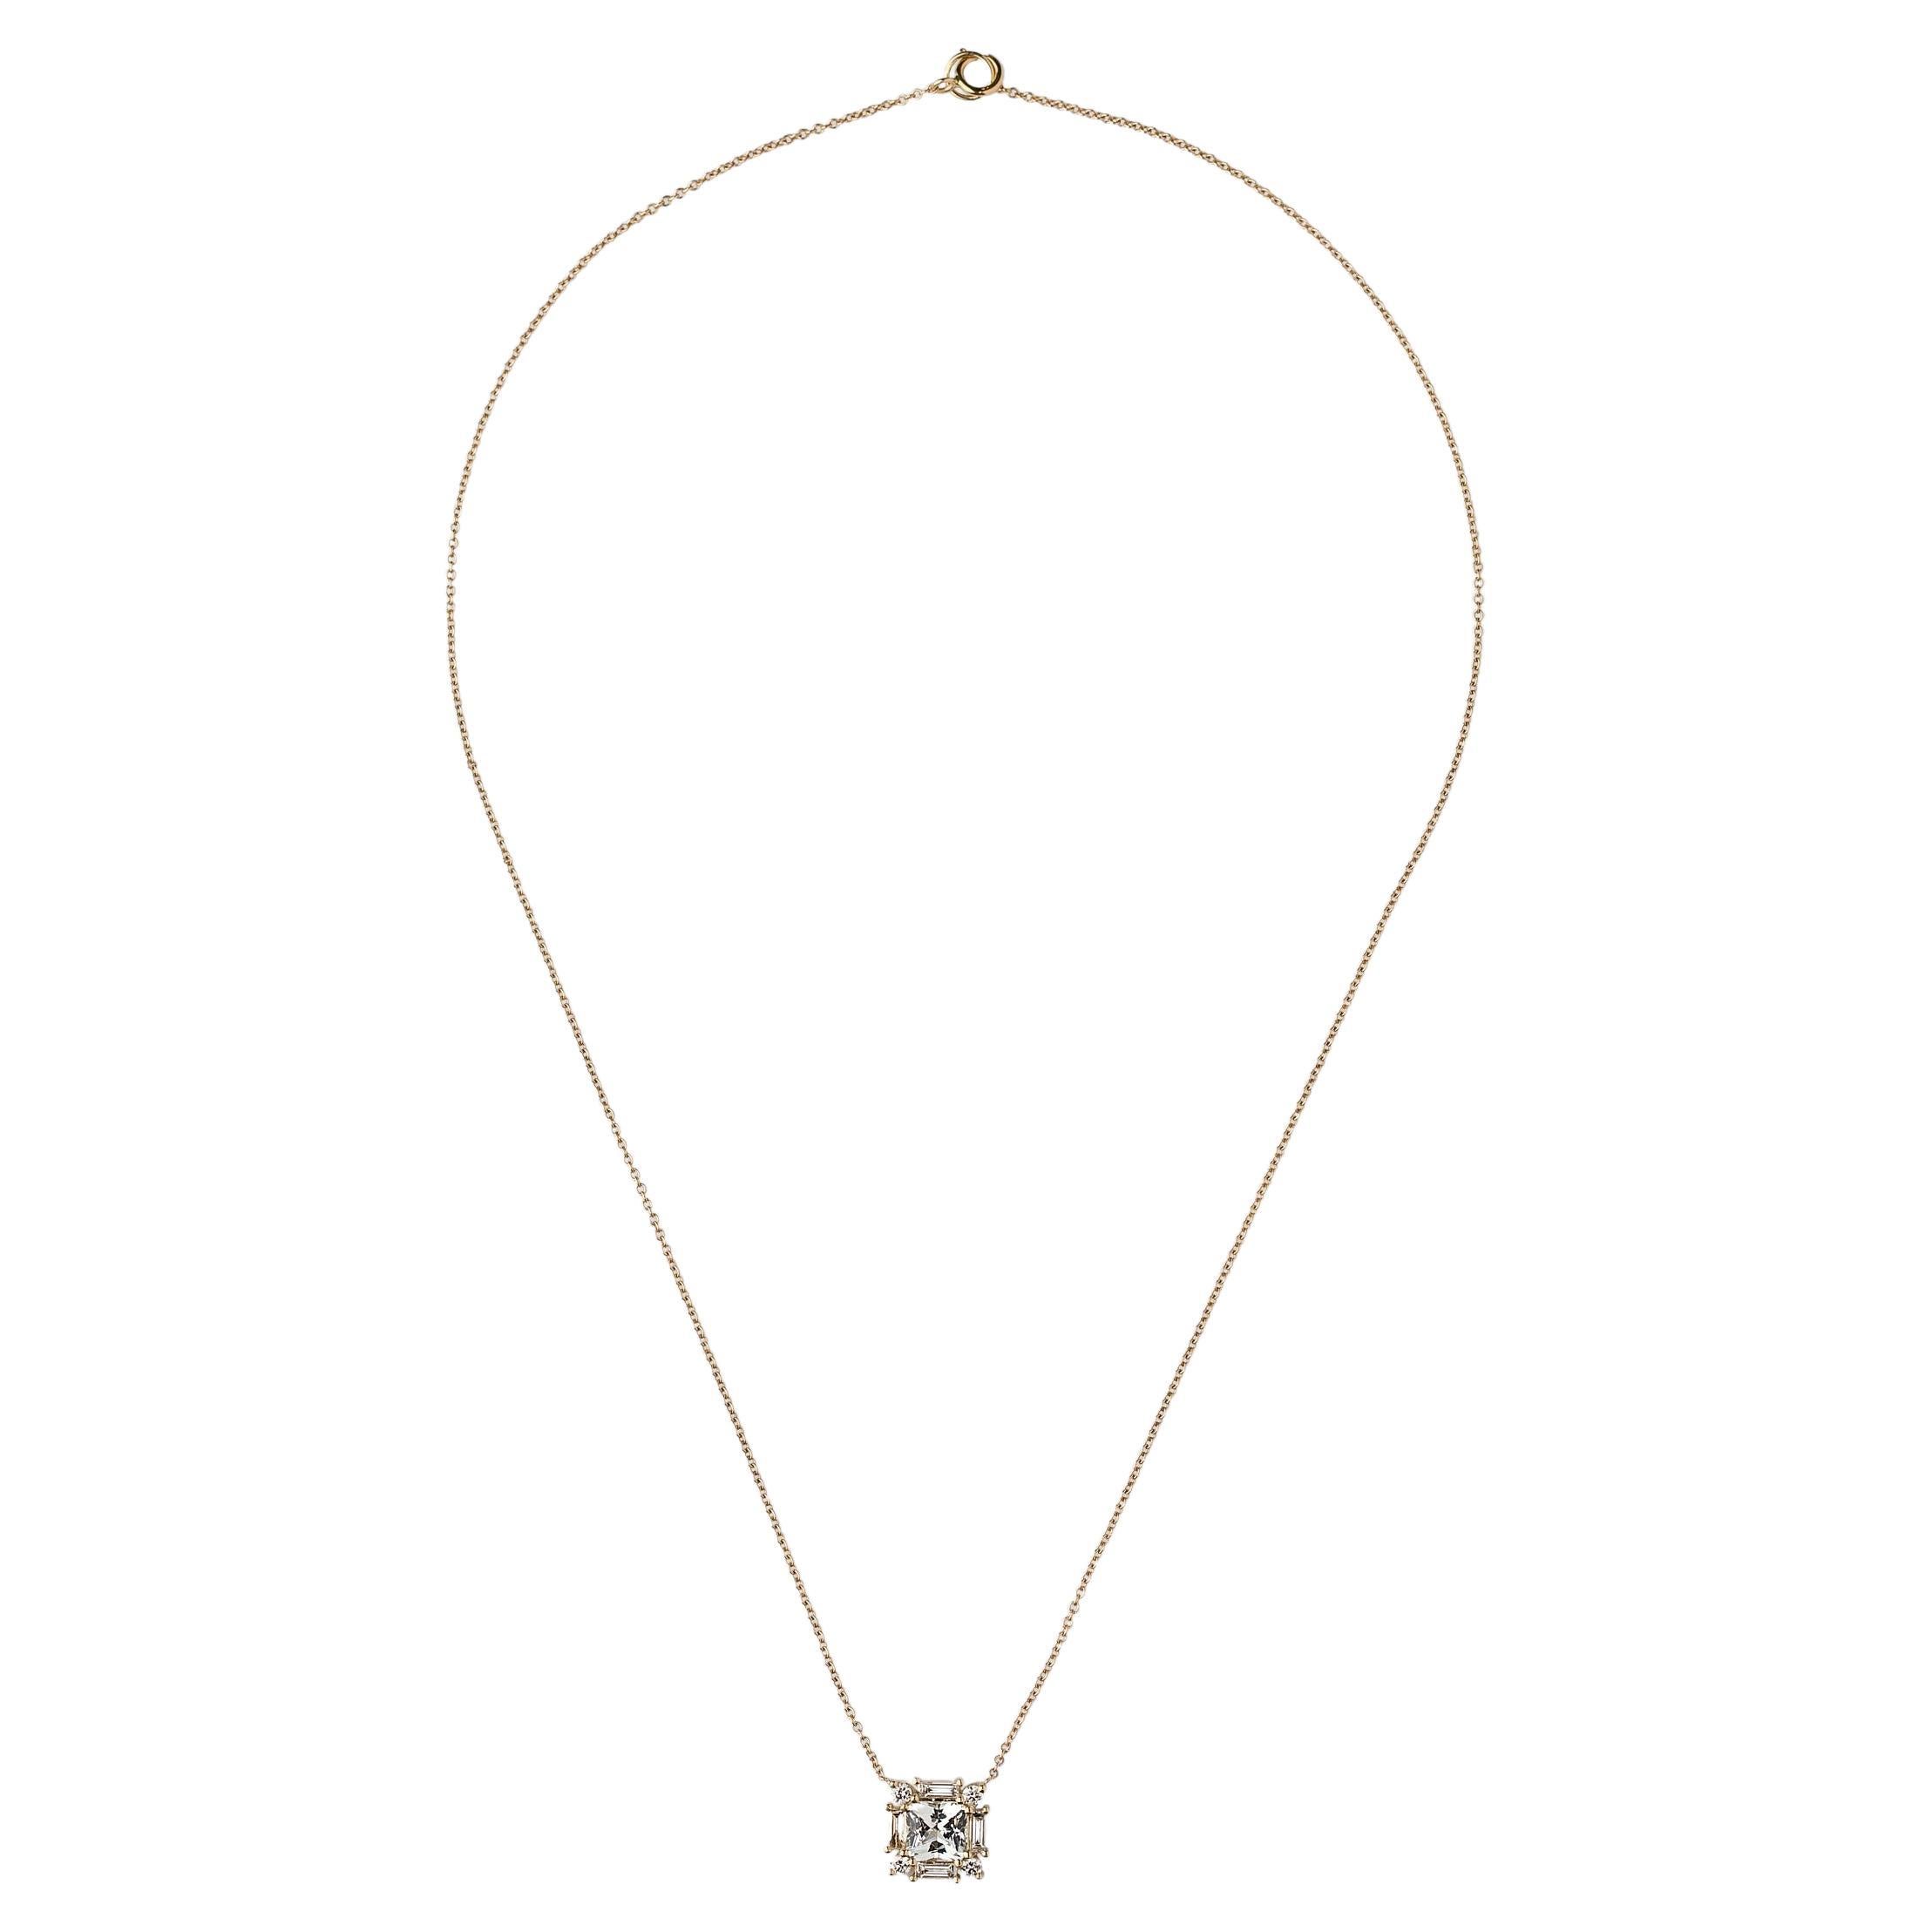 Embark on a journey of refined elegance with the 14K Yellow Gold White Sapphire Pendant, a radiant masterpiece that captures the essence of celestial beauty. At its core, a majestic 6.3mm square radiant-cut white sapphire, boasting 1.20 carats of